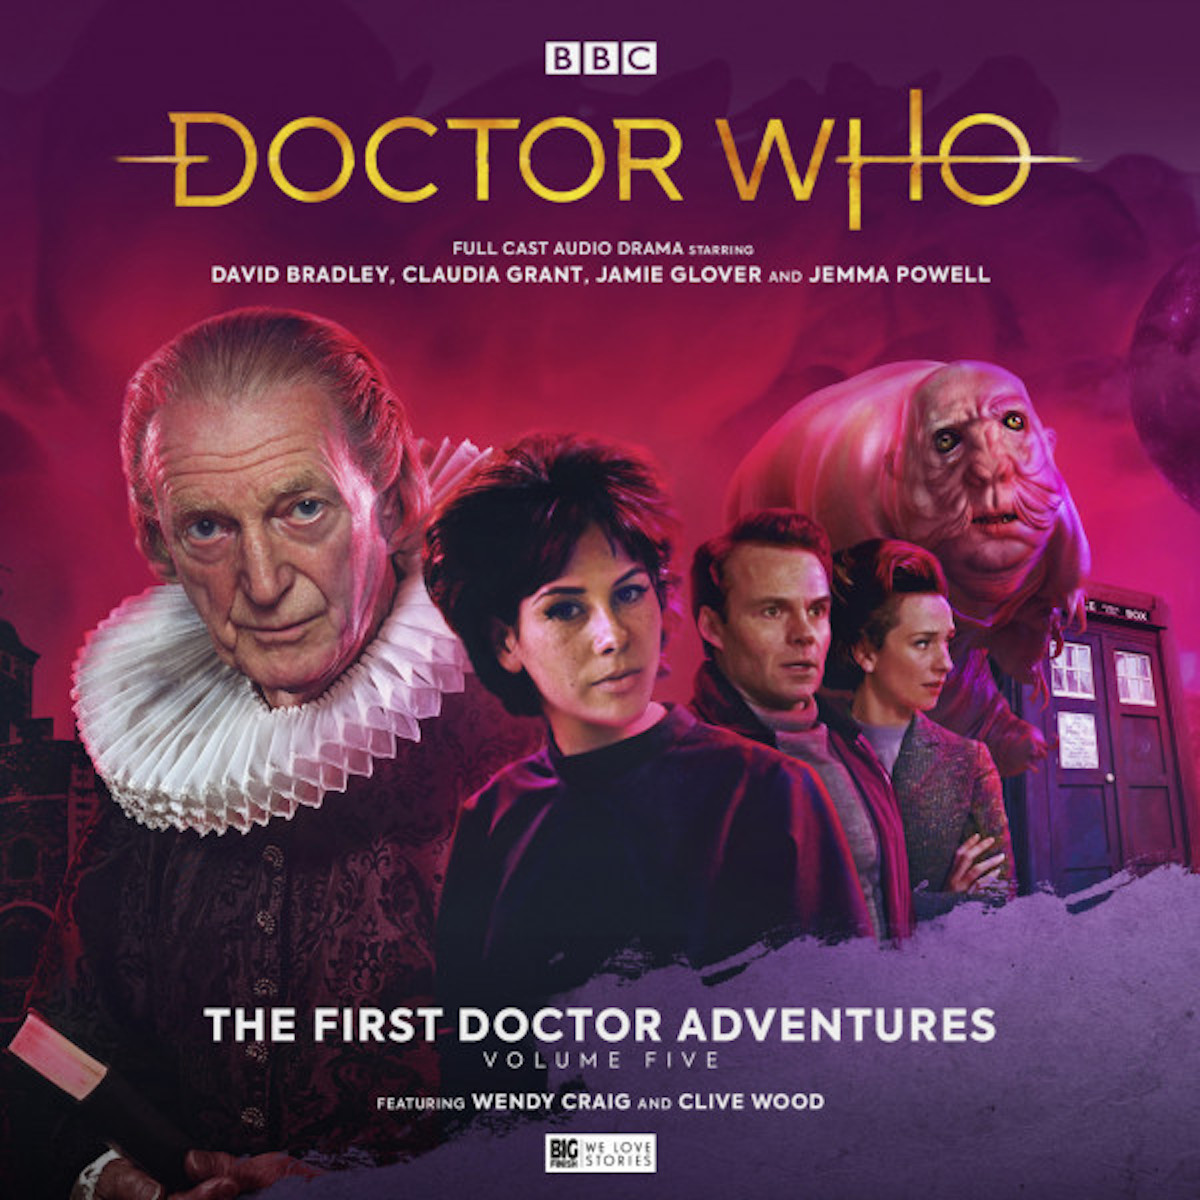 The First Doctor Adventures Volume 5